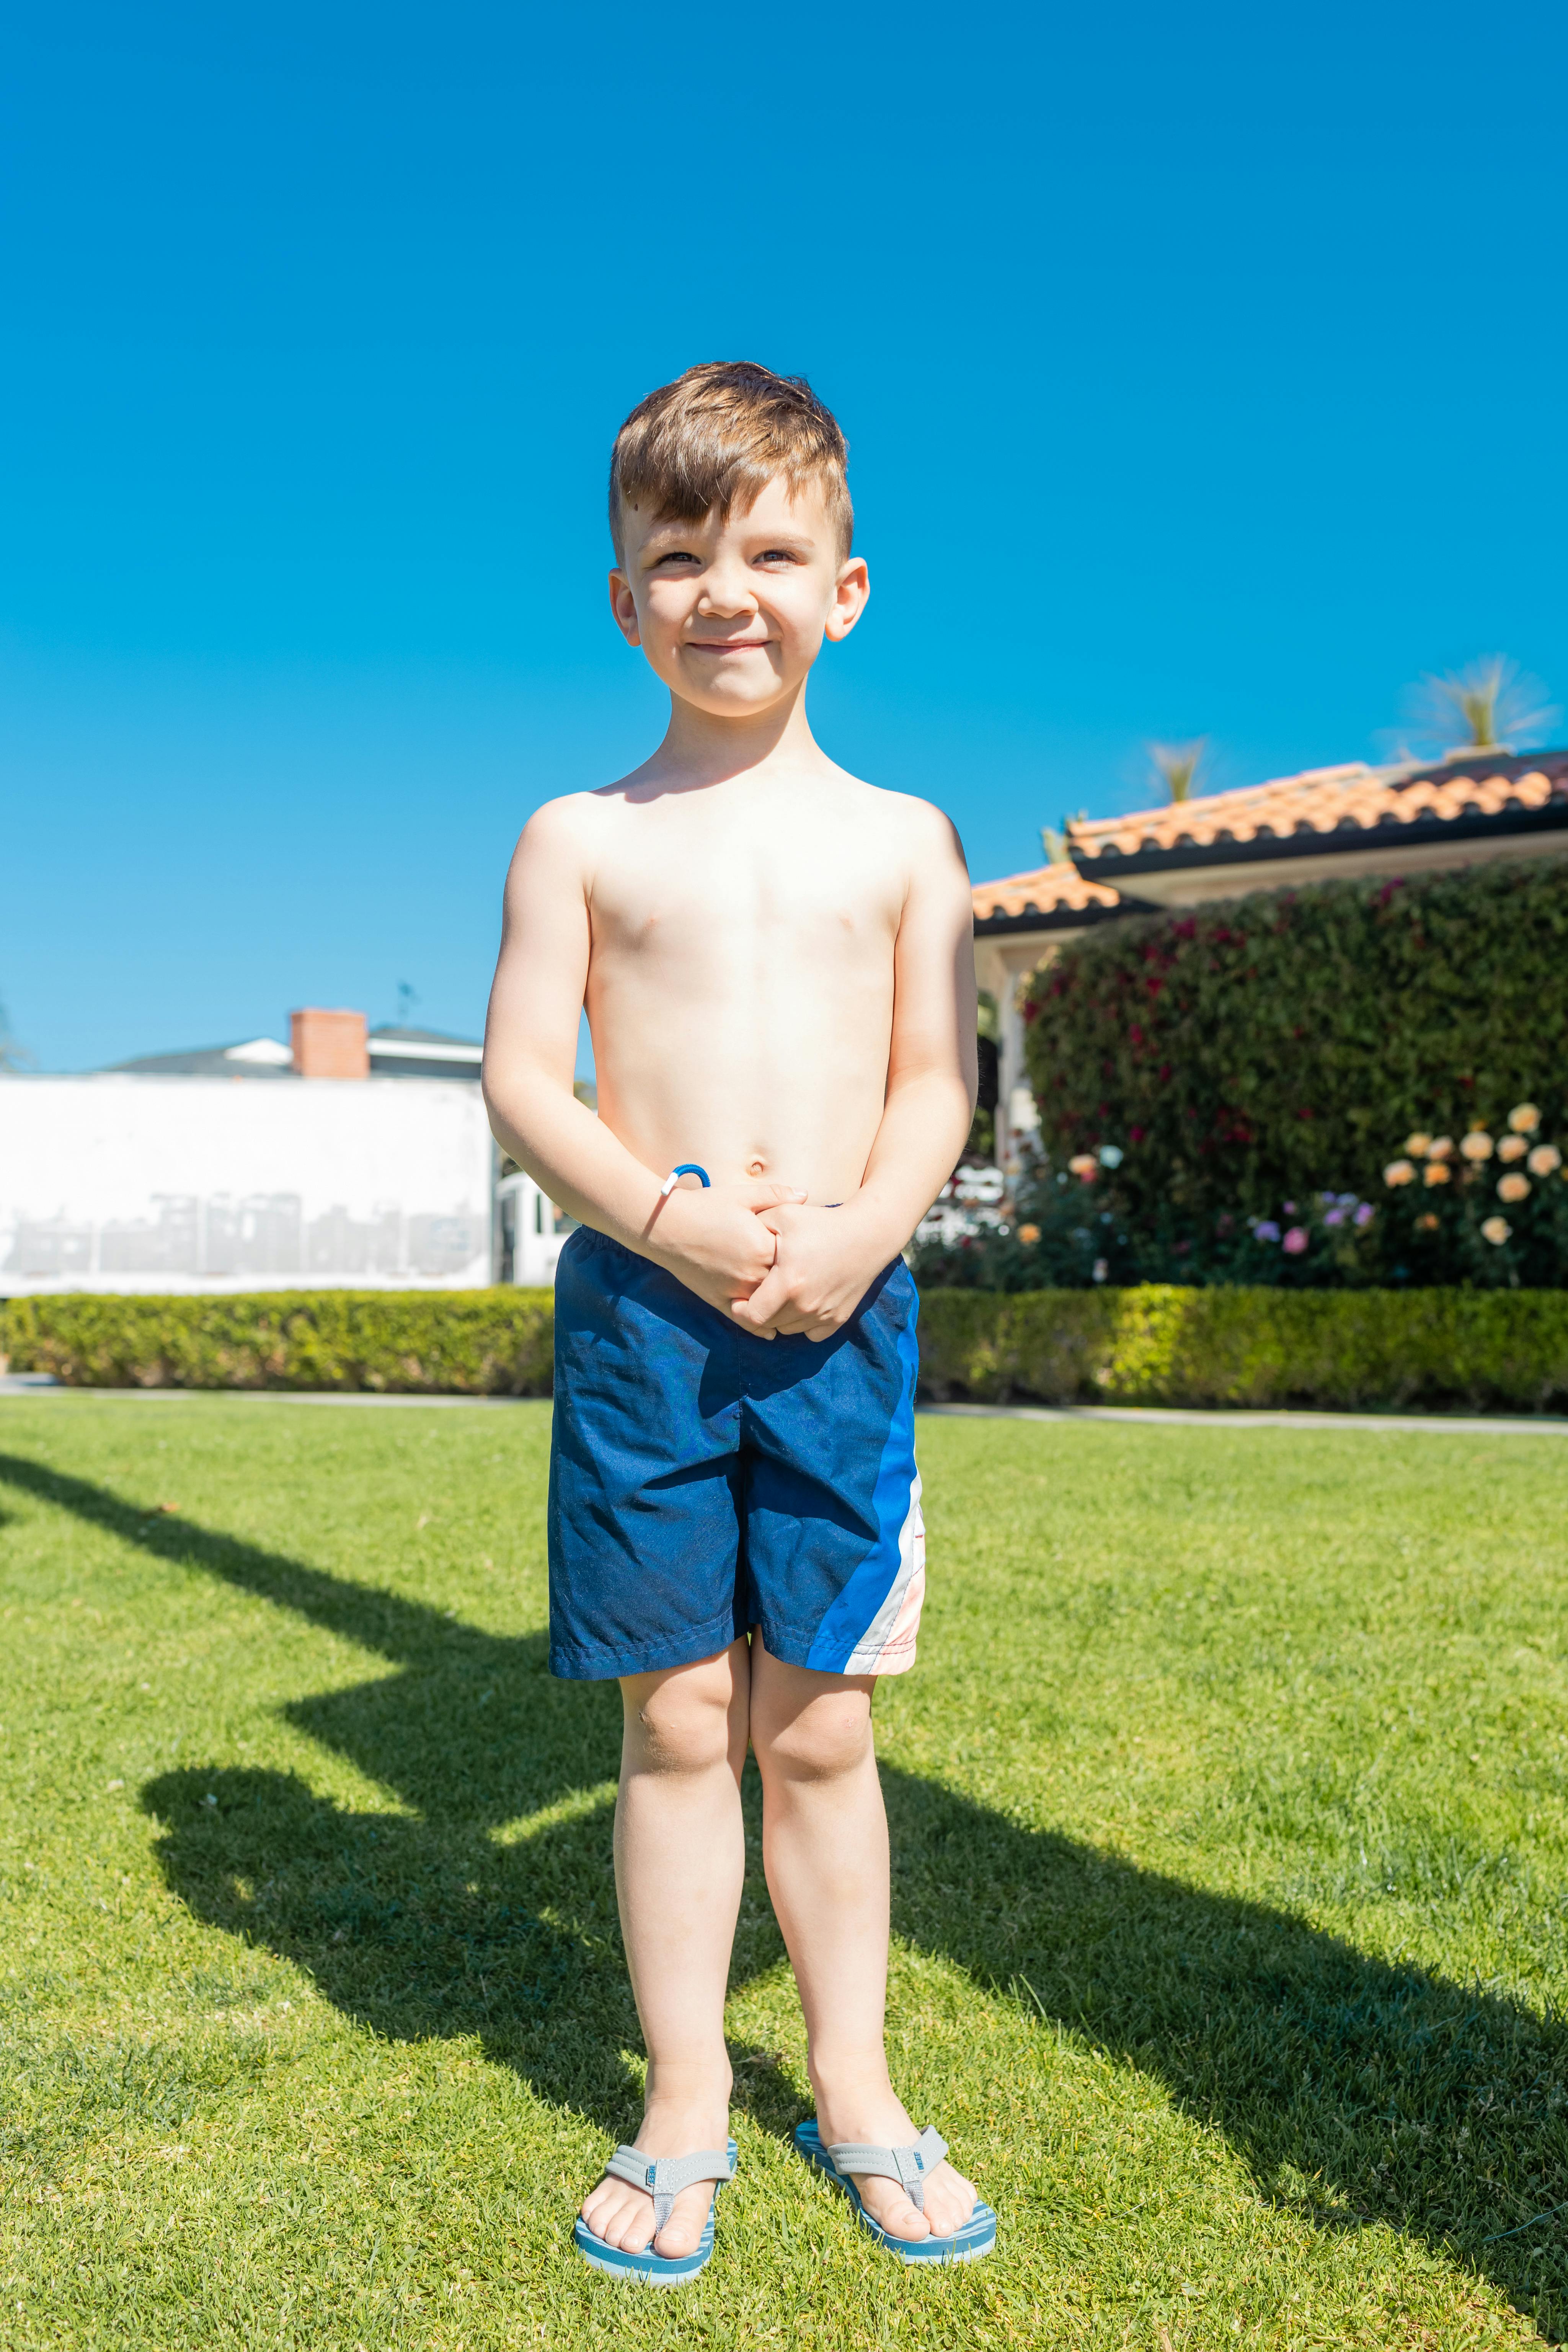 A Boy In Blue Shorts Standing On Green Grass Field · Free Stock Photo